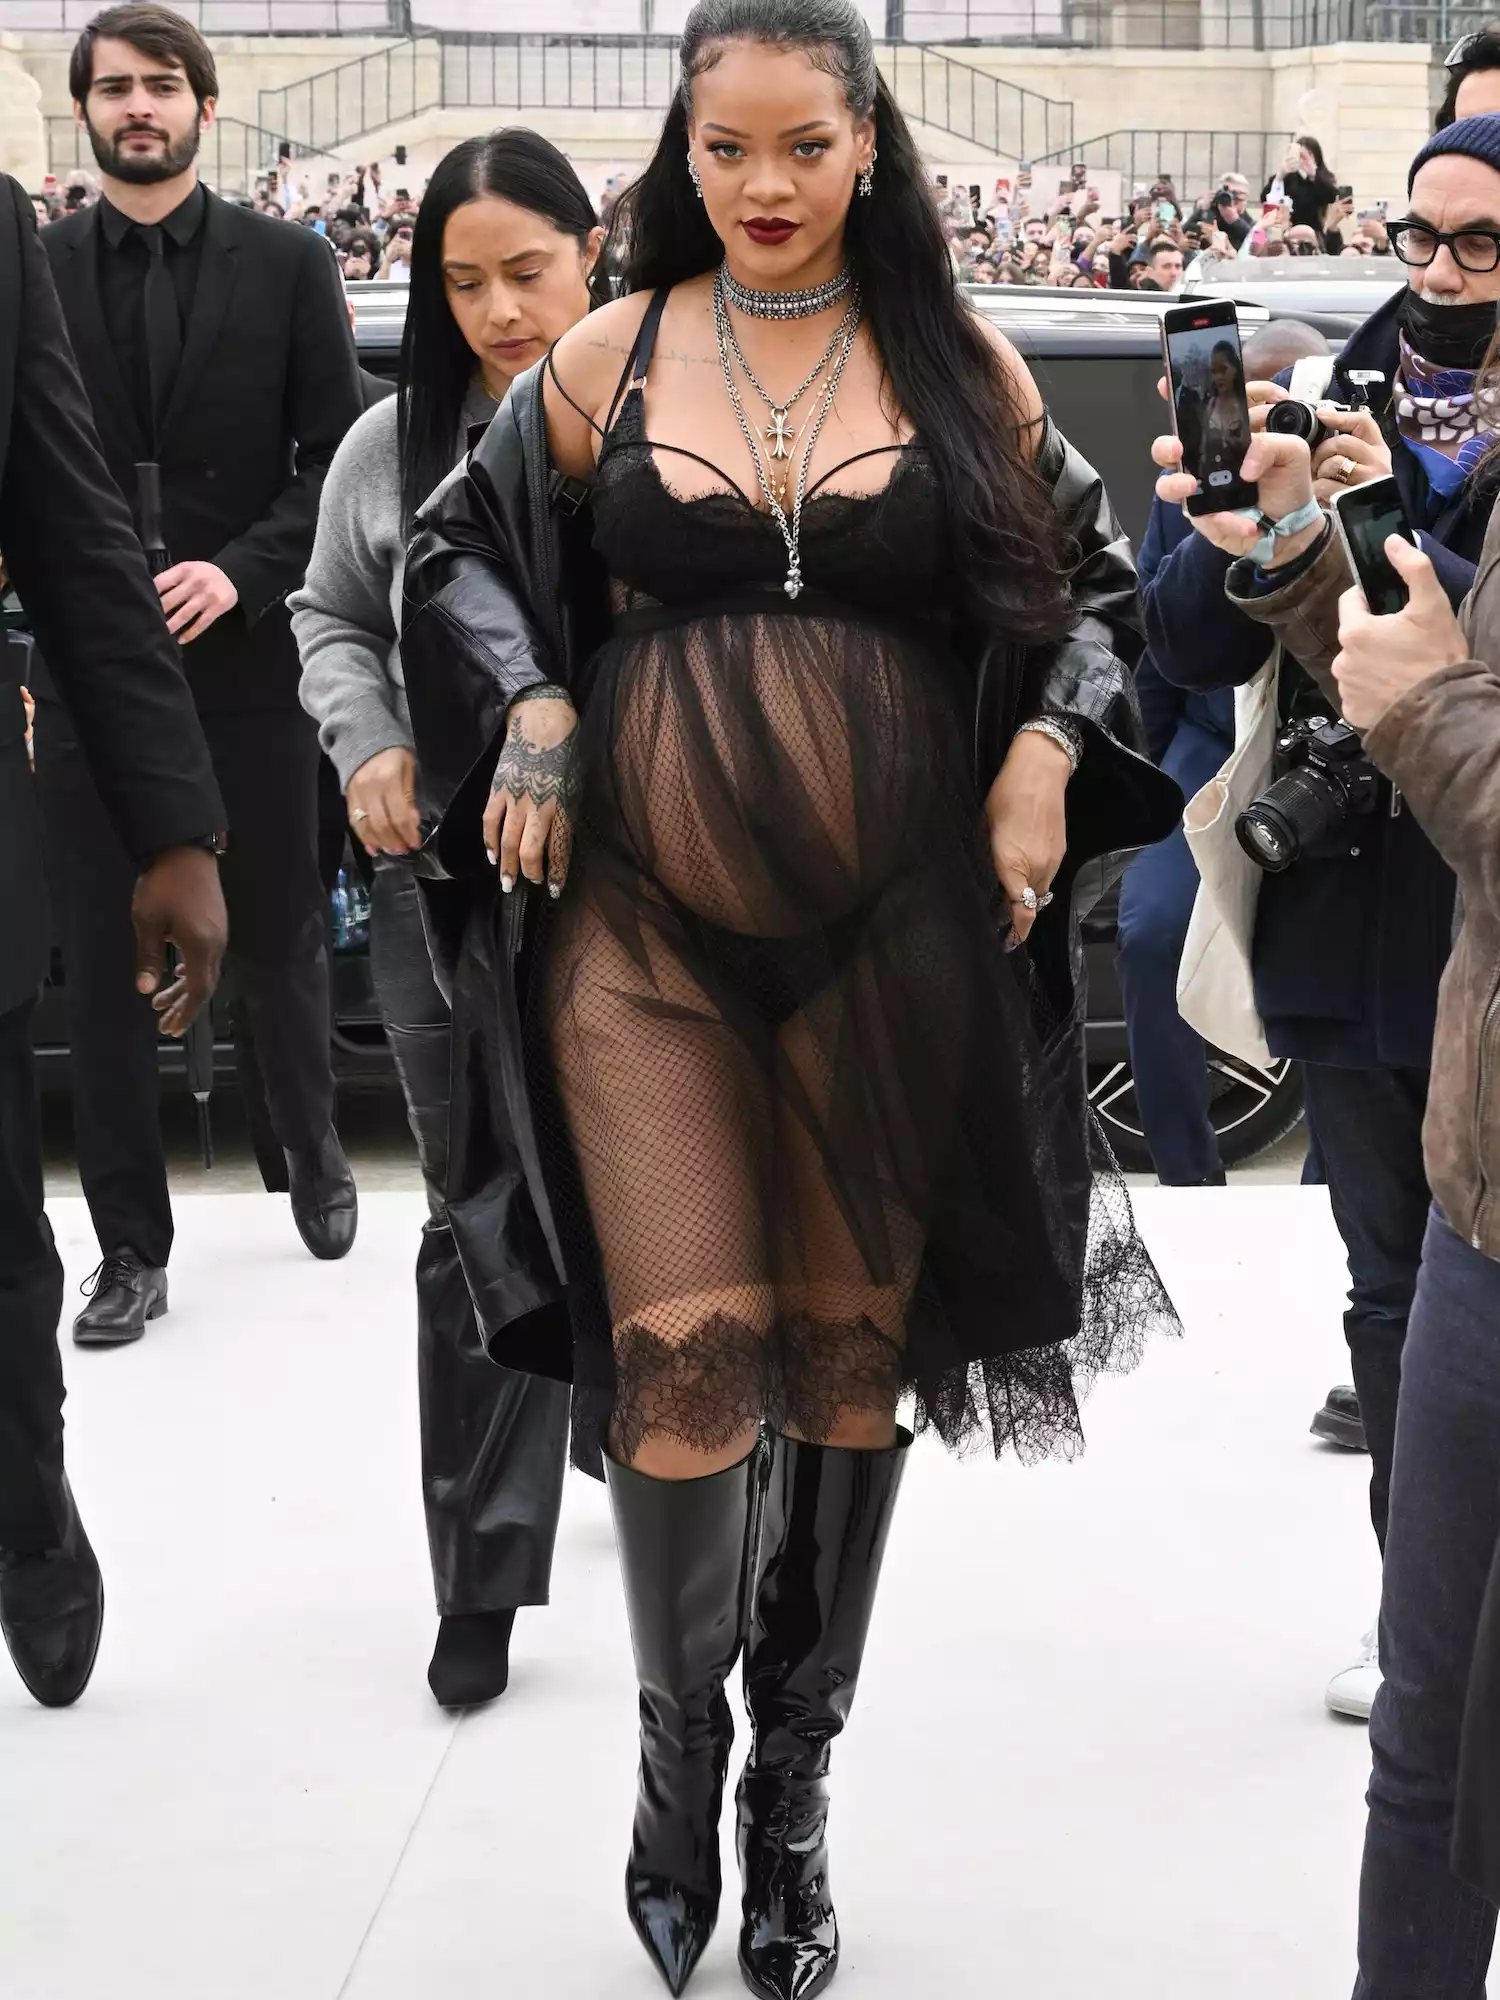 Rihanna wears a sheer black dress with lingerie, a leather trench coat, and boots to the Dior Fall 2022 show at Paris Fashion Week